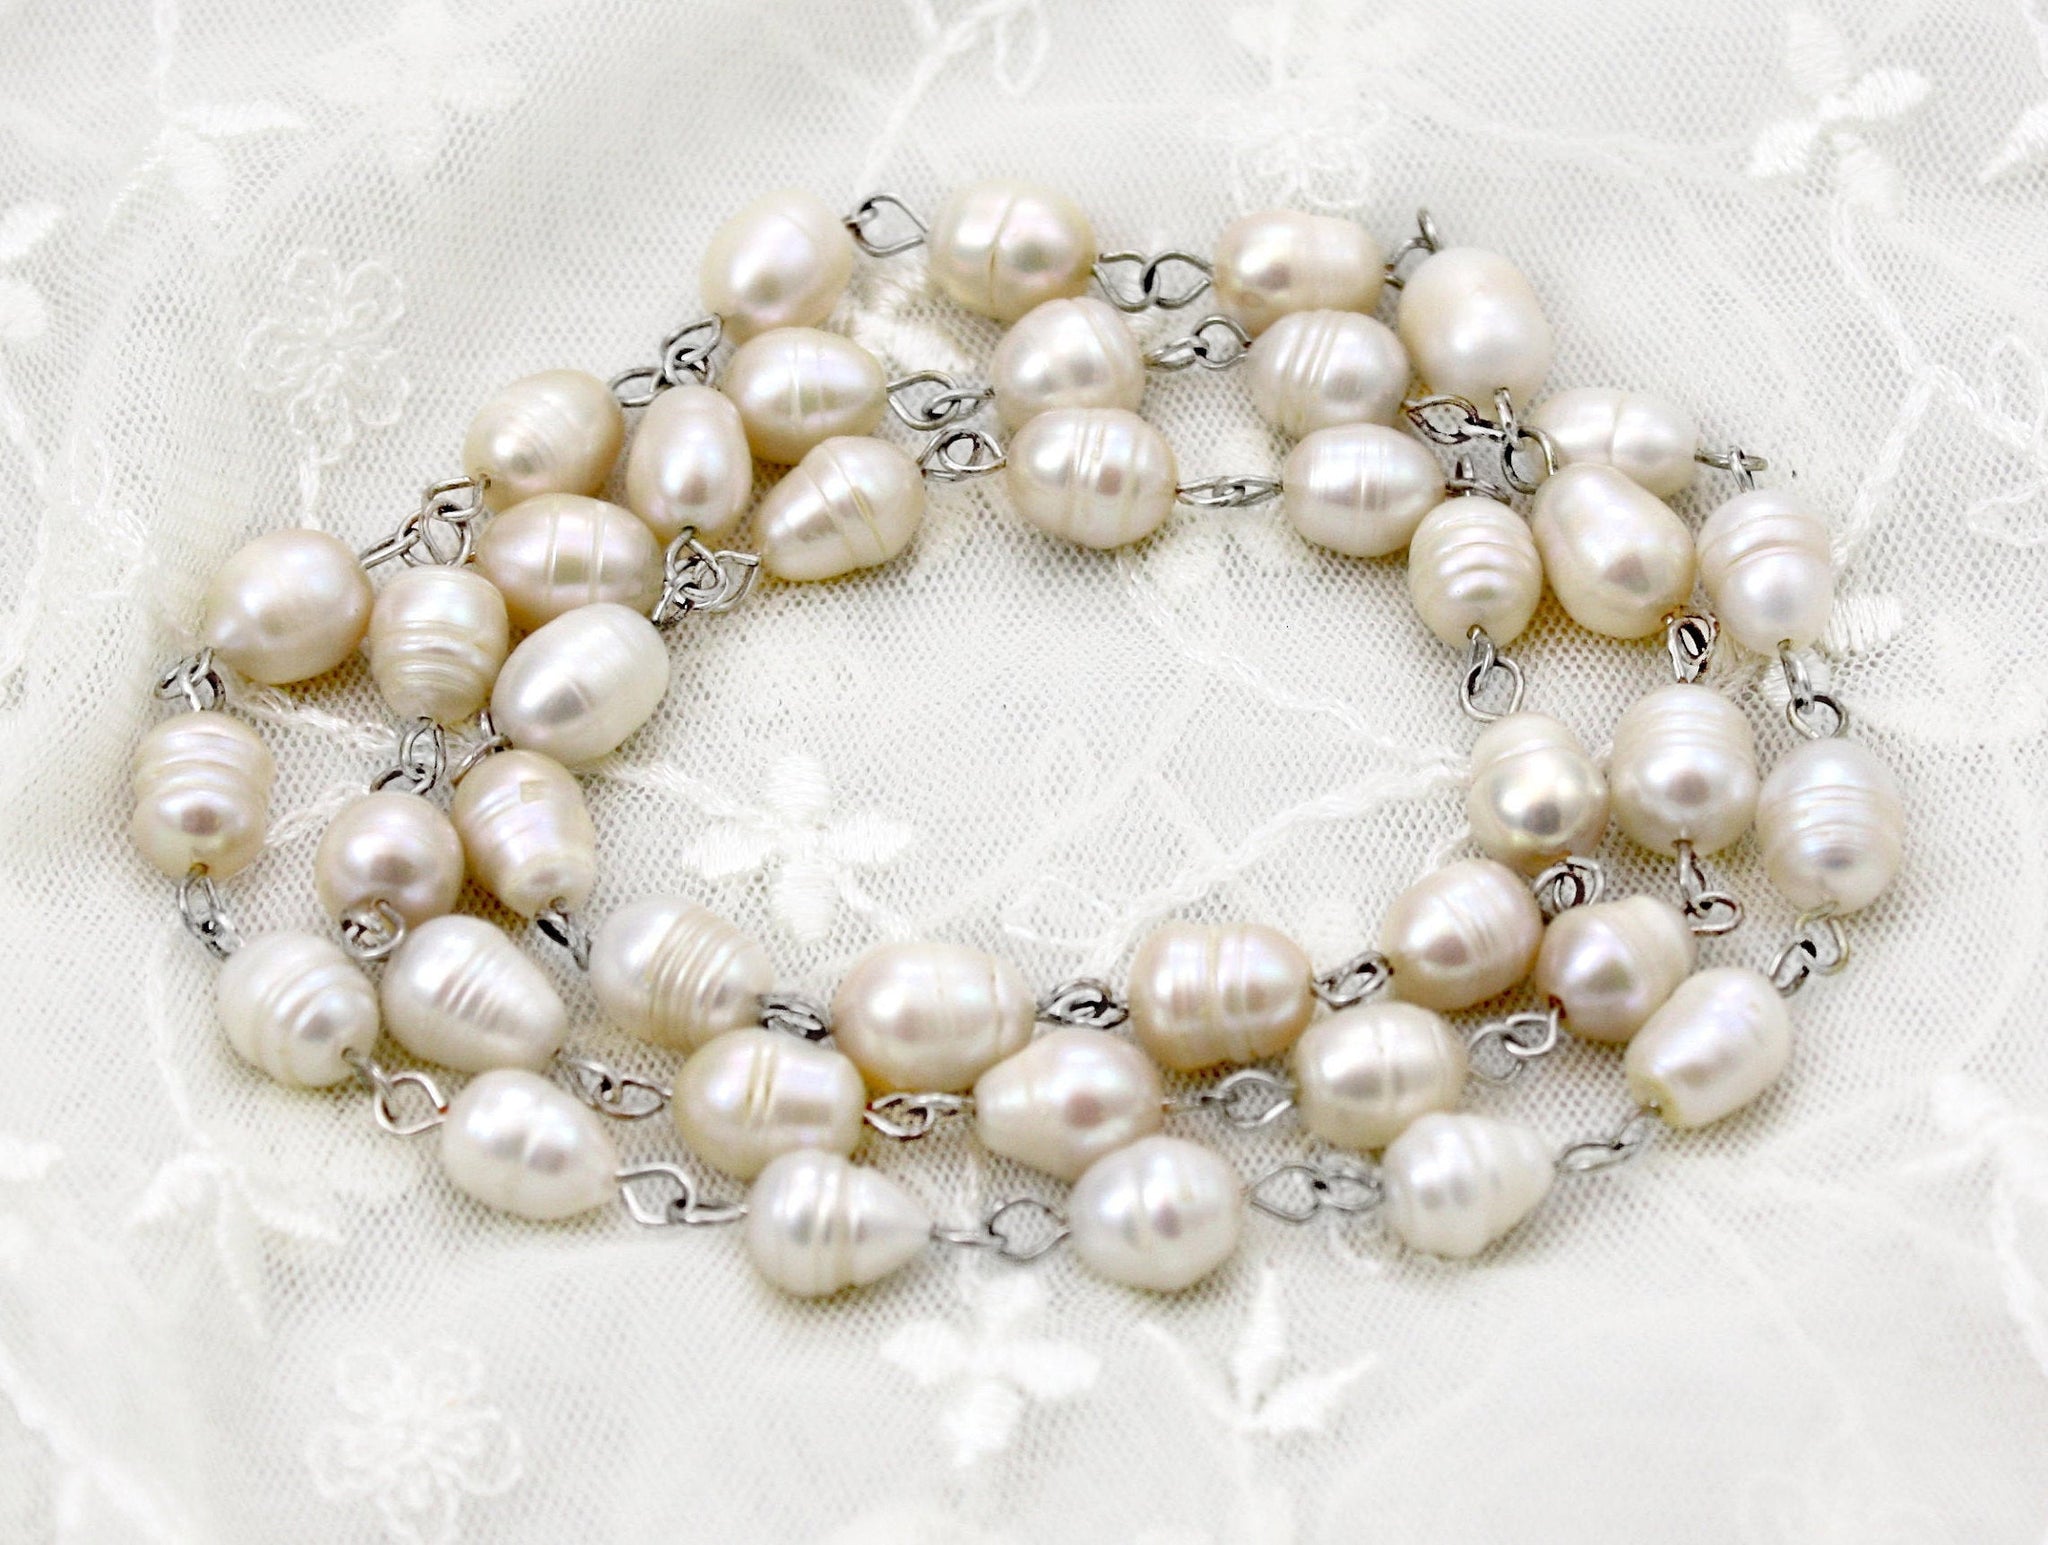 White Baroque Freshwater Cultured Pearl Necklace, 17 Inches, Sterling  Silver